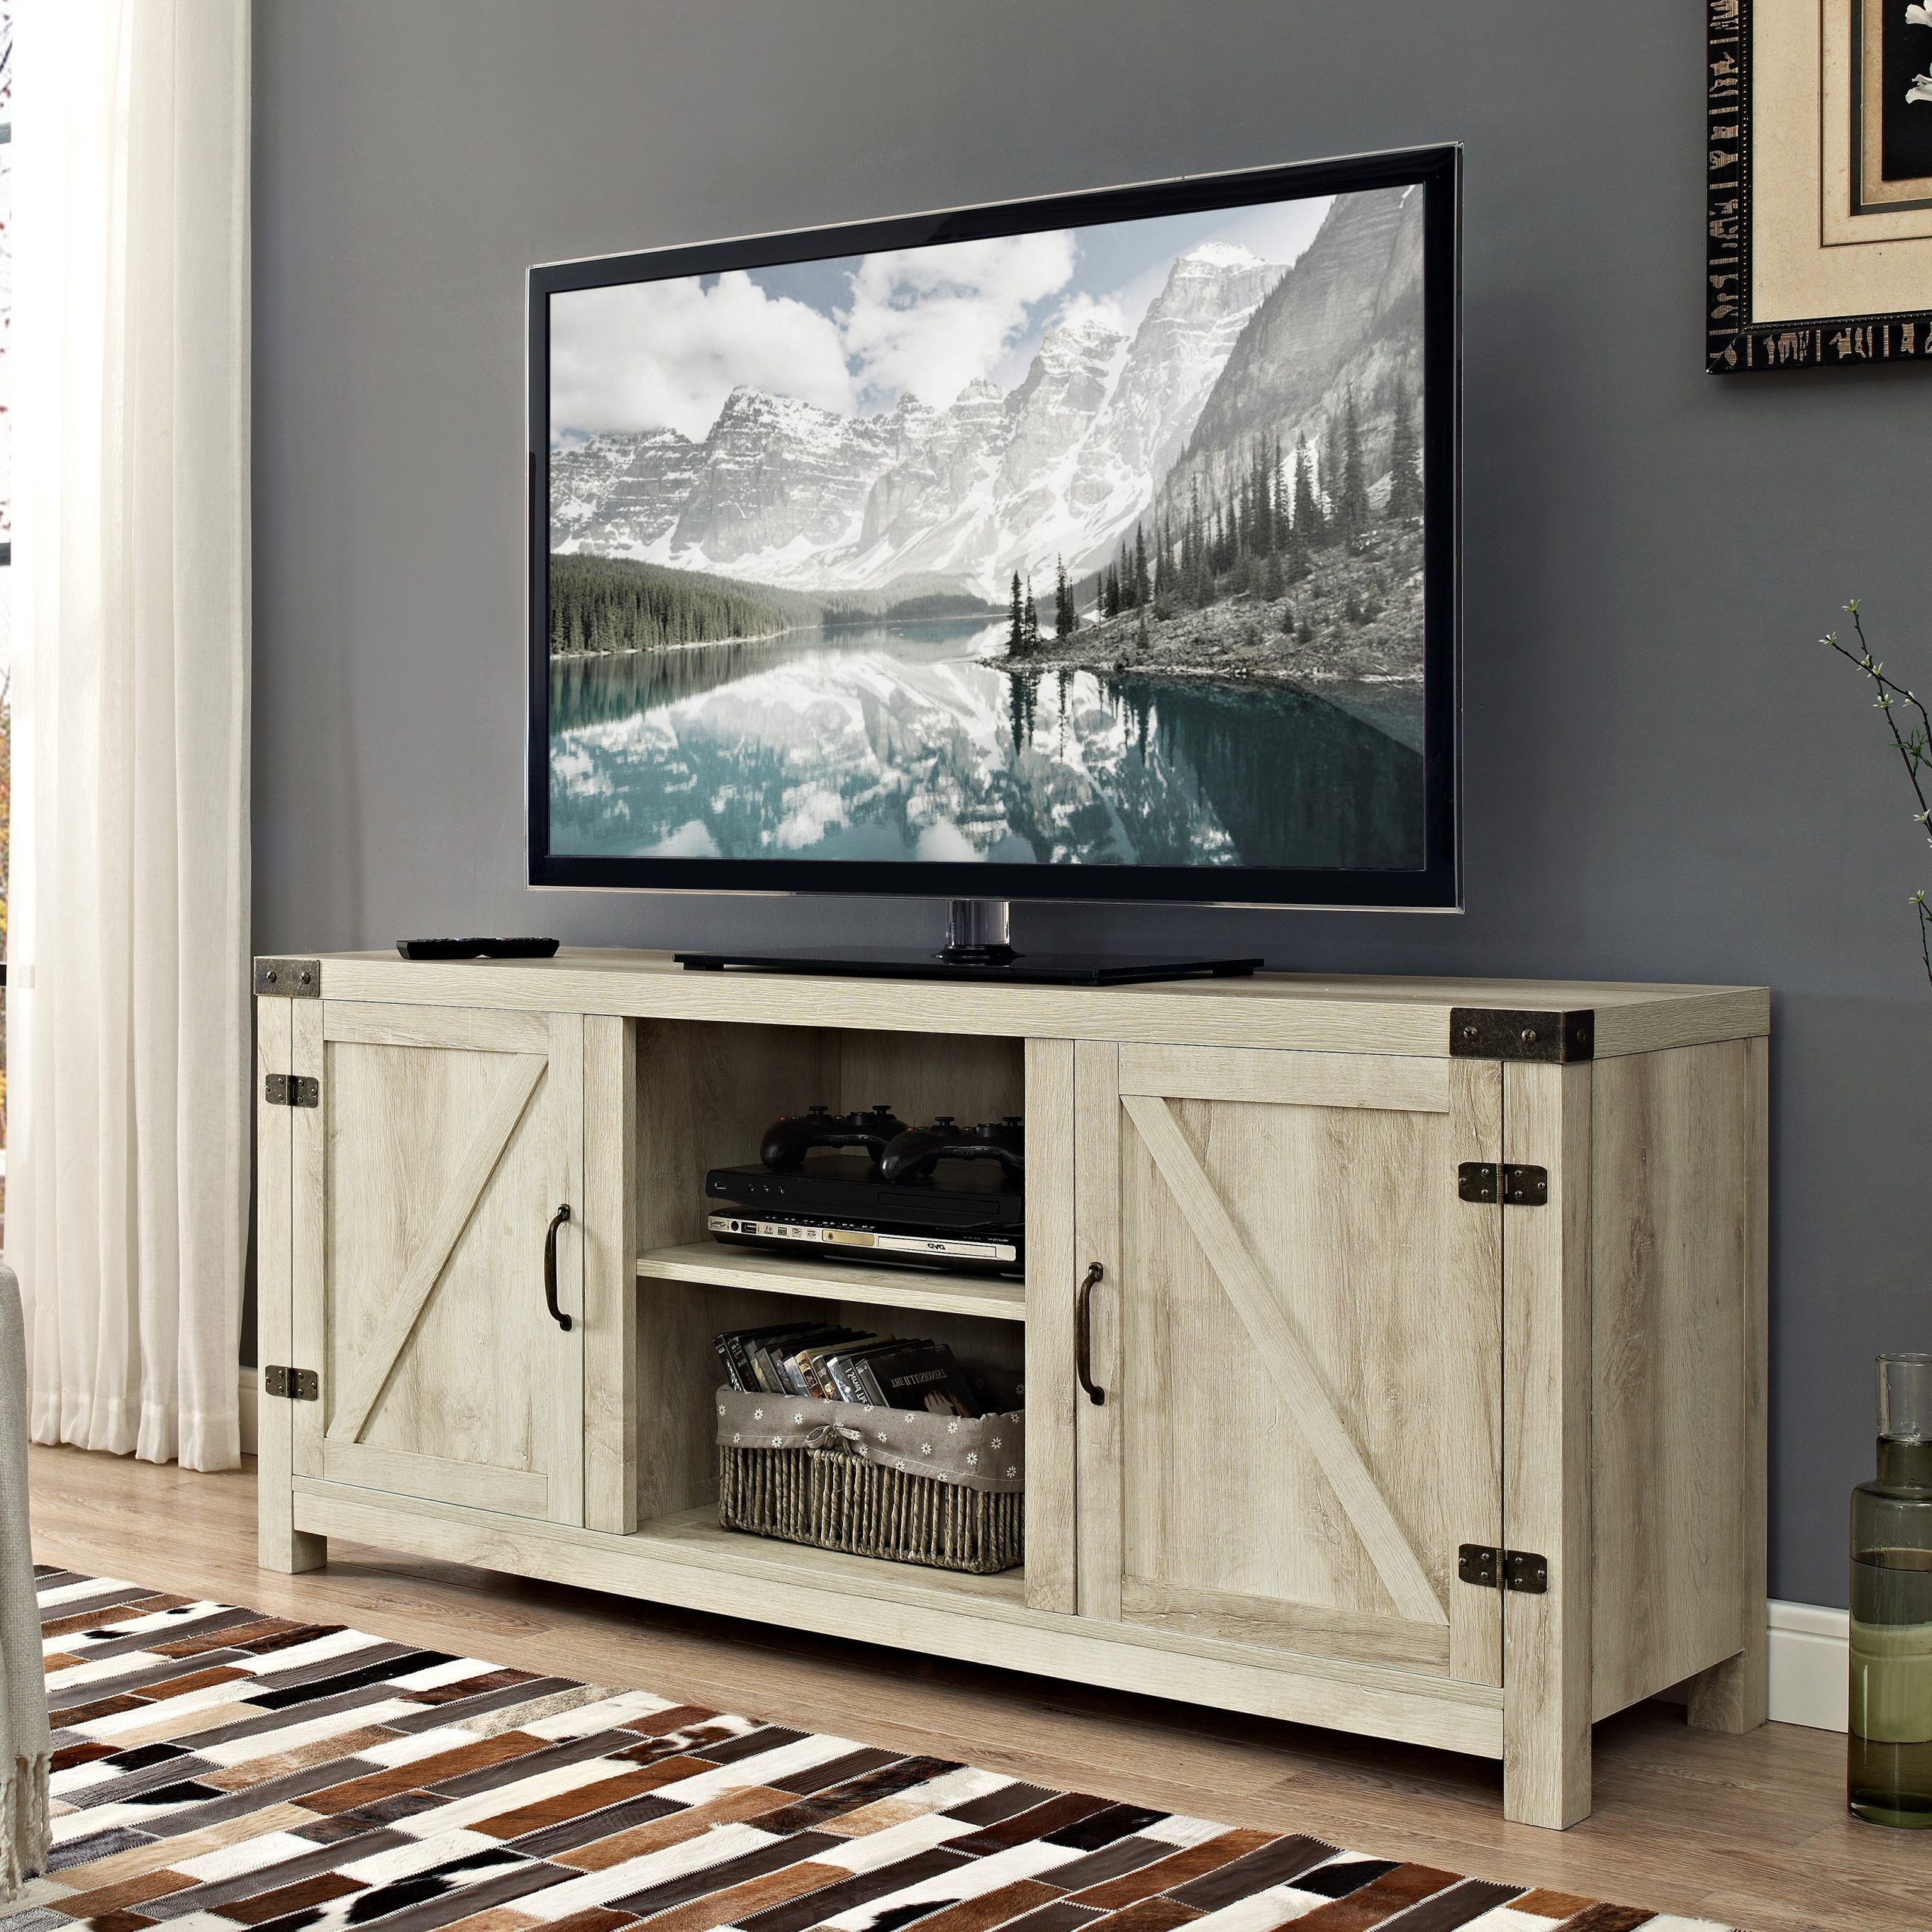 Woven Paths Modern Farmhouse Barn Door Tv Stand For Tvs Up Within Caleah Tv Stands For Tvs Up To 65" (Gallery 8 of 20)